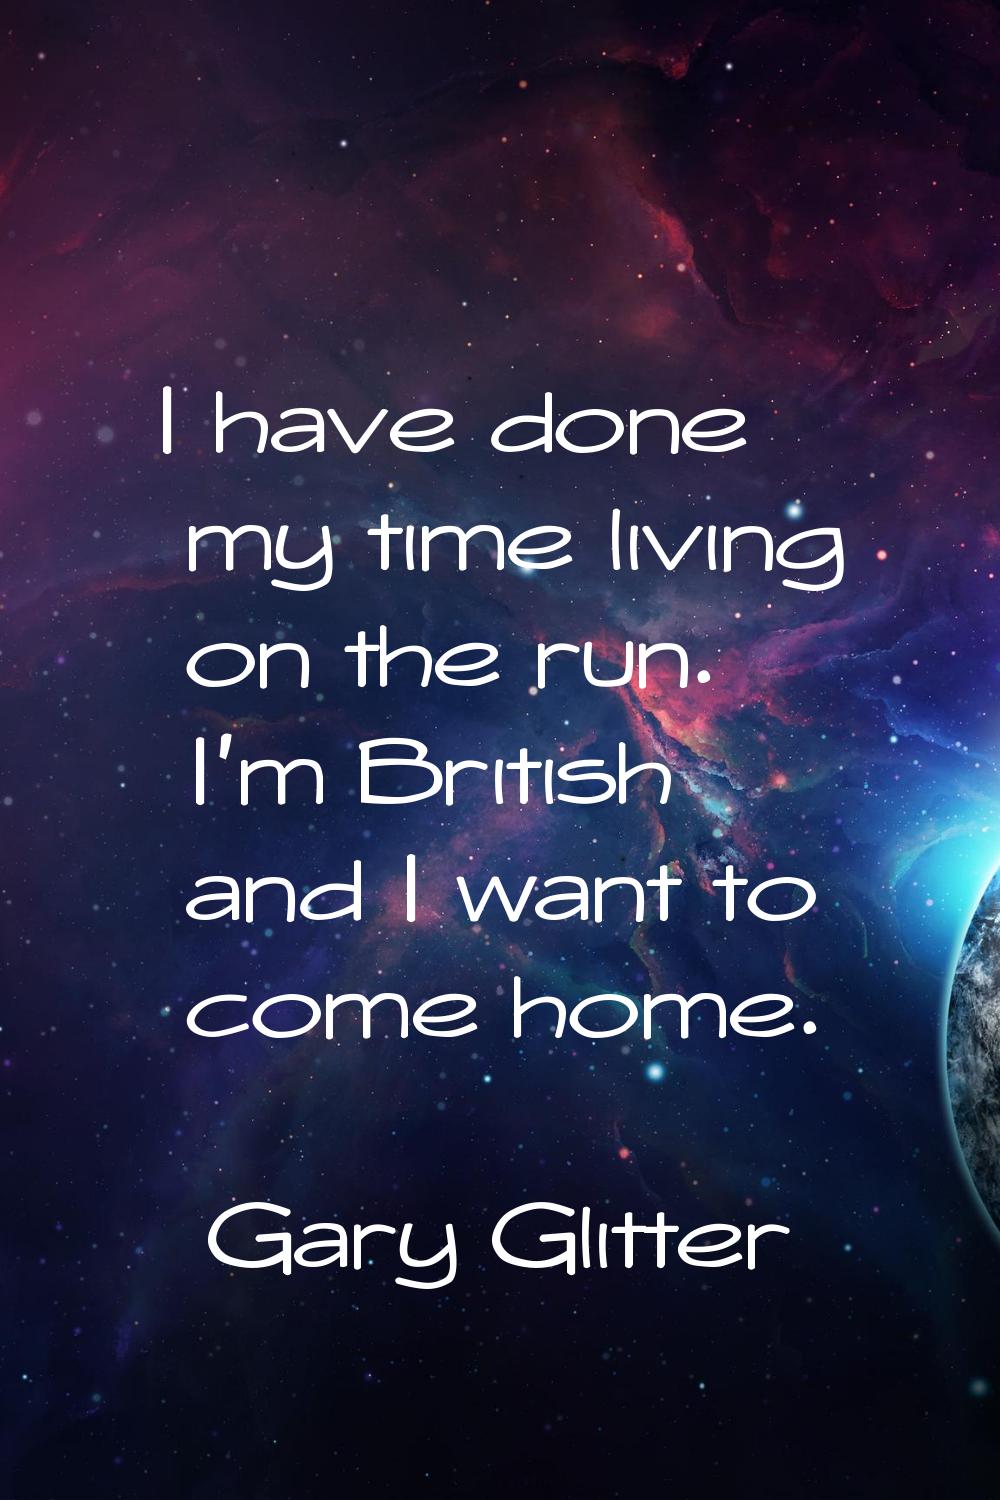 I have done my time living on the run. I'm British and I want to come home.